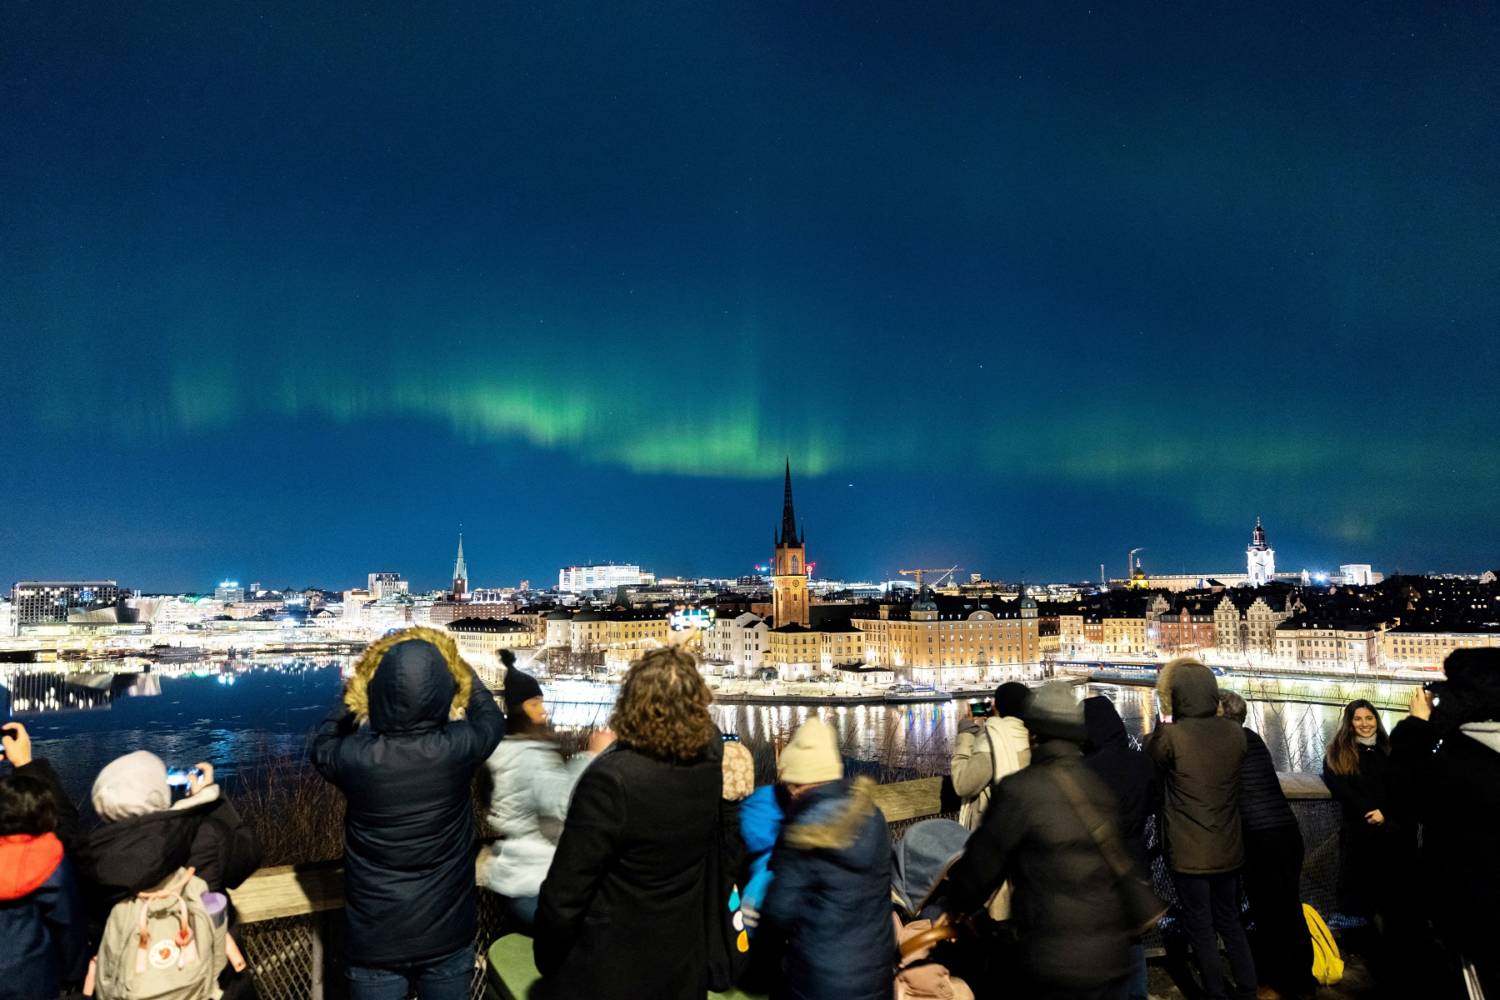 People Watch The Northern Lights, Aurora Borealis, In Central Stockholm